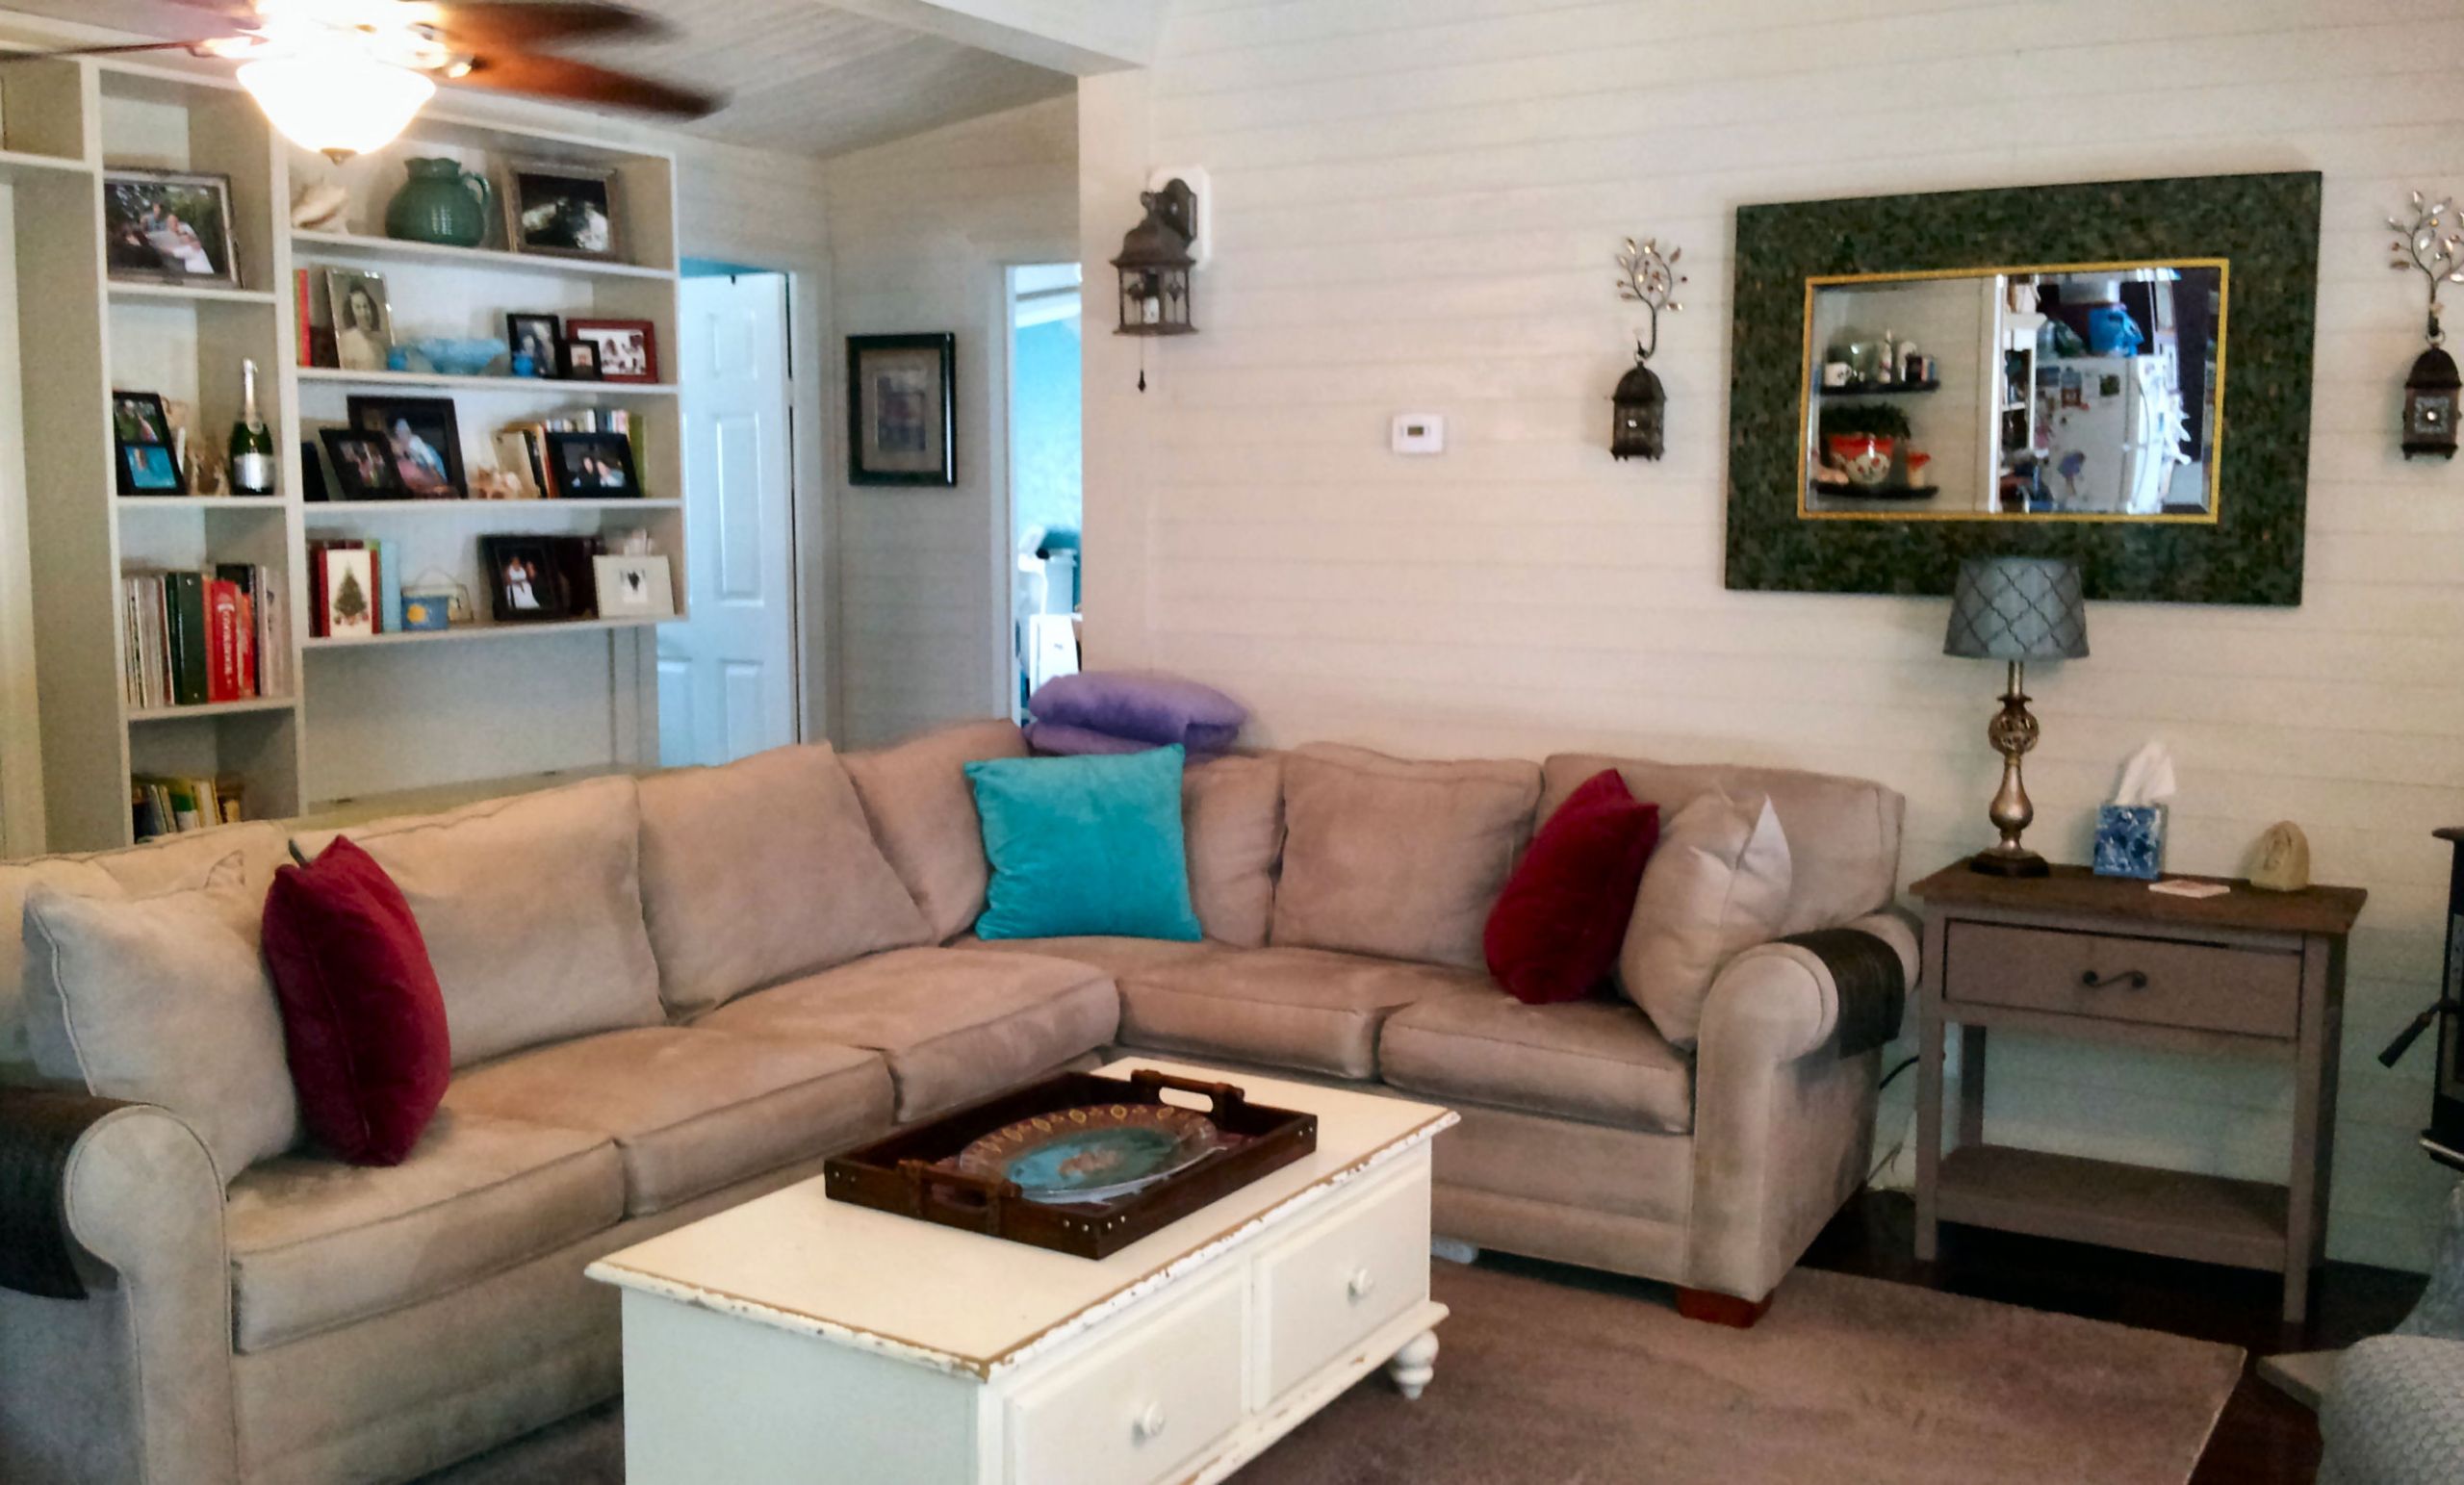 Mobile Home Living Room Ideas
 Mobile Home Living Room Remodel The Finale My Mobile